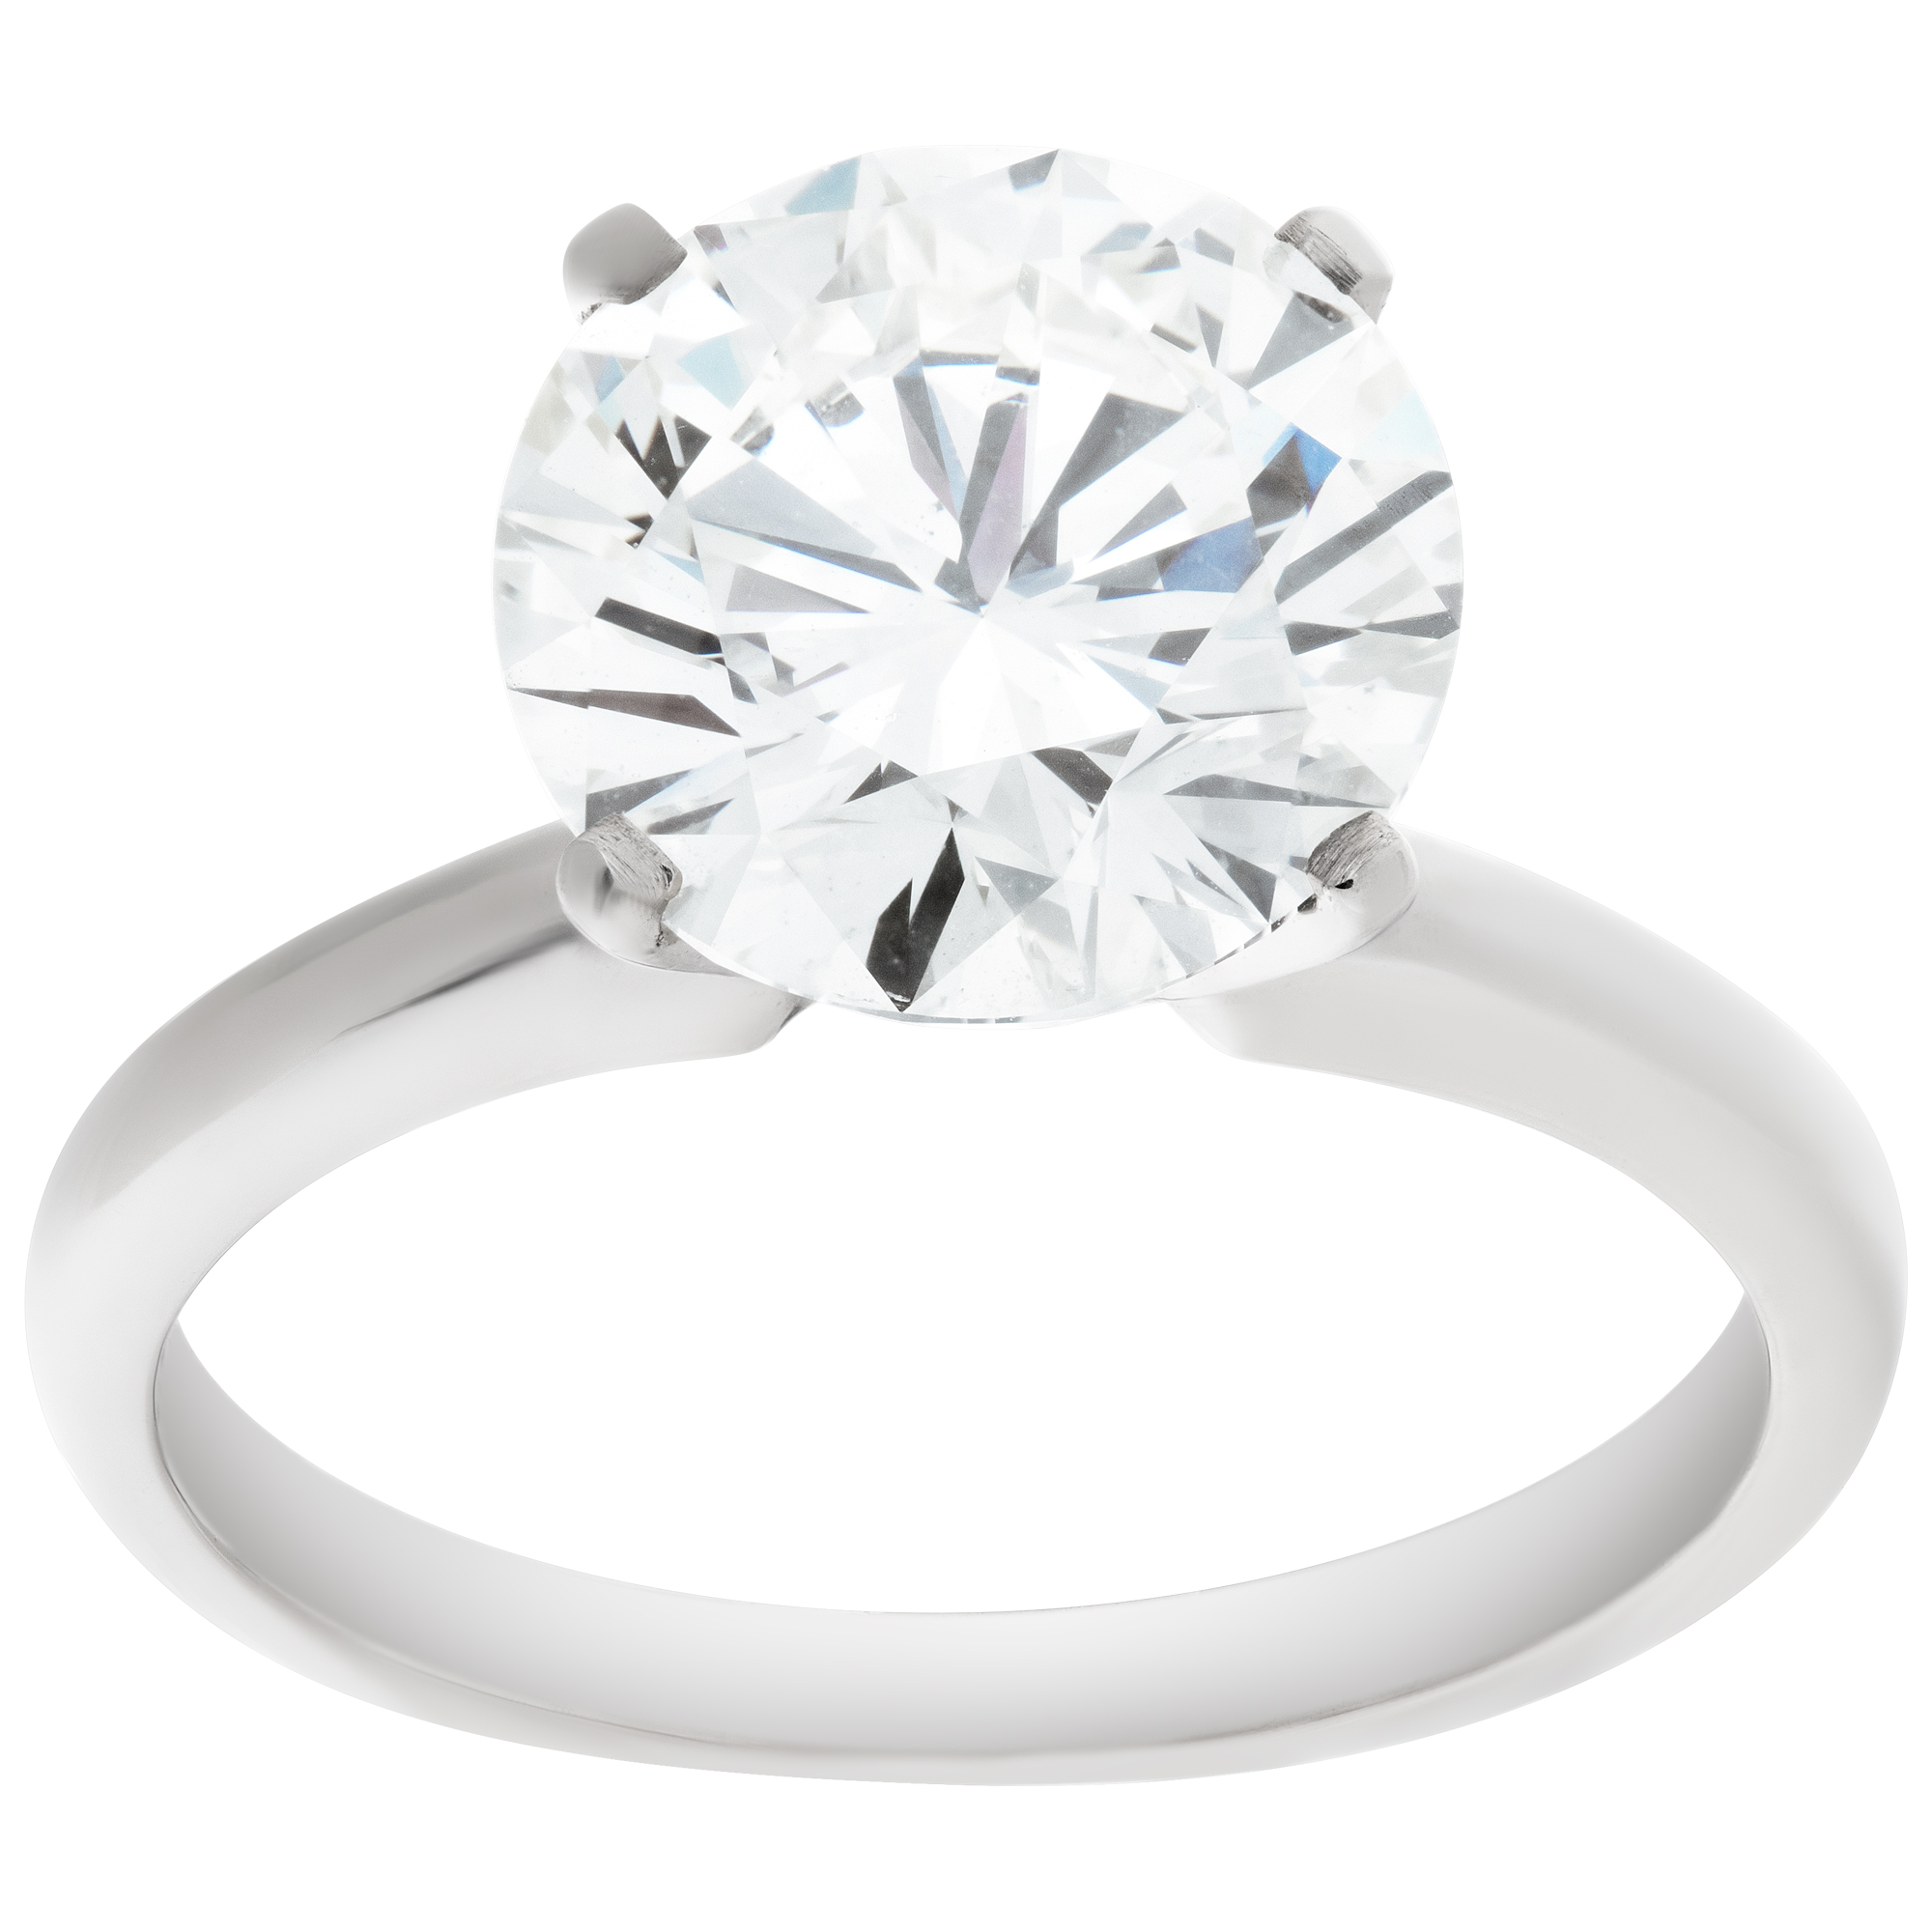 GIA certified round brilliant cut diamond 3.02 carat (L color, Internally Flawless clarity) set in platinum ring image 1